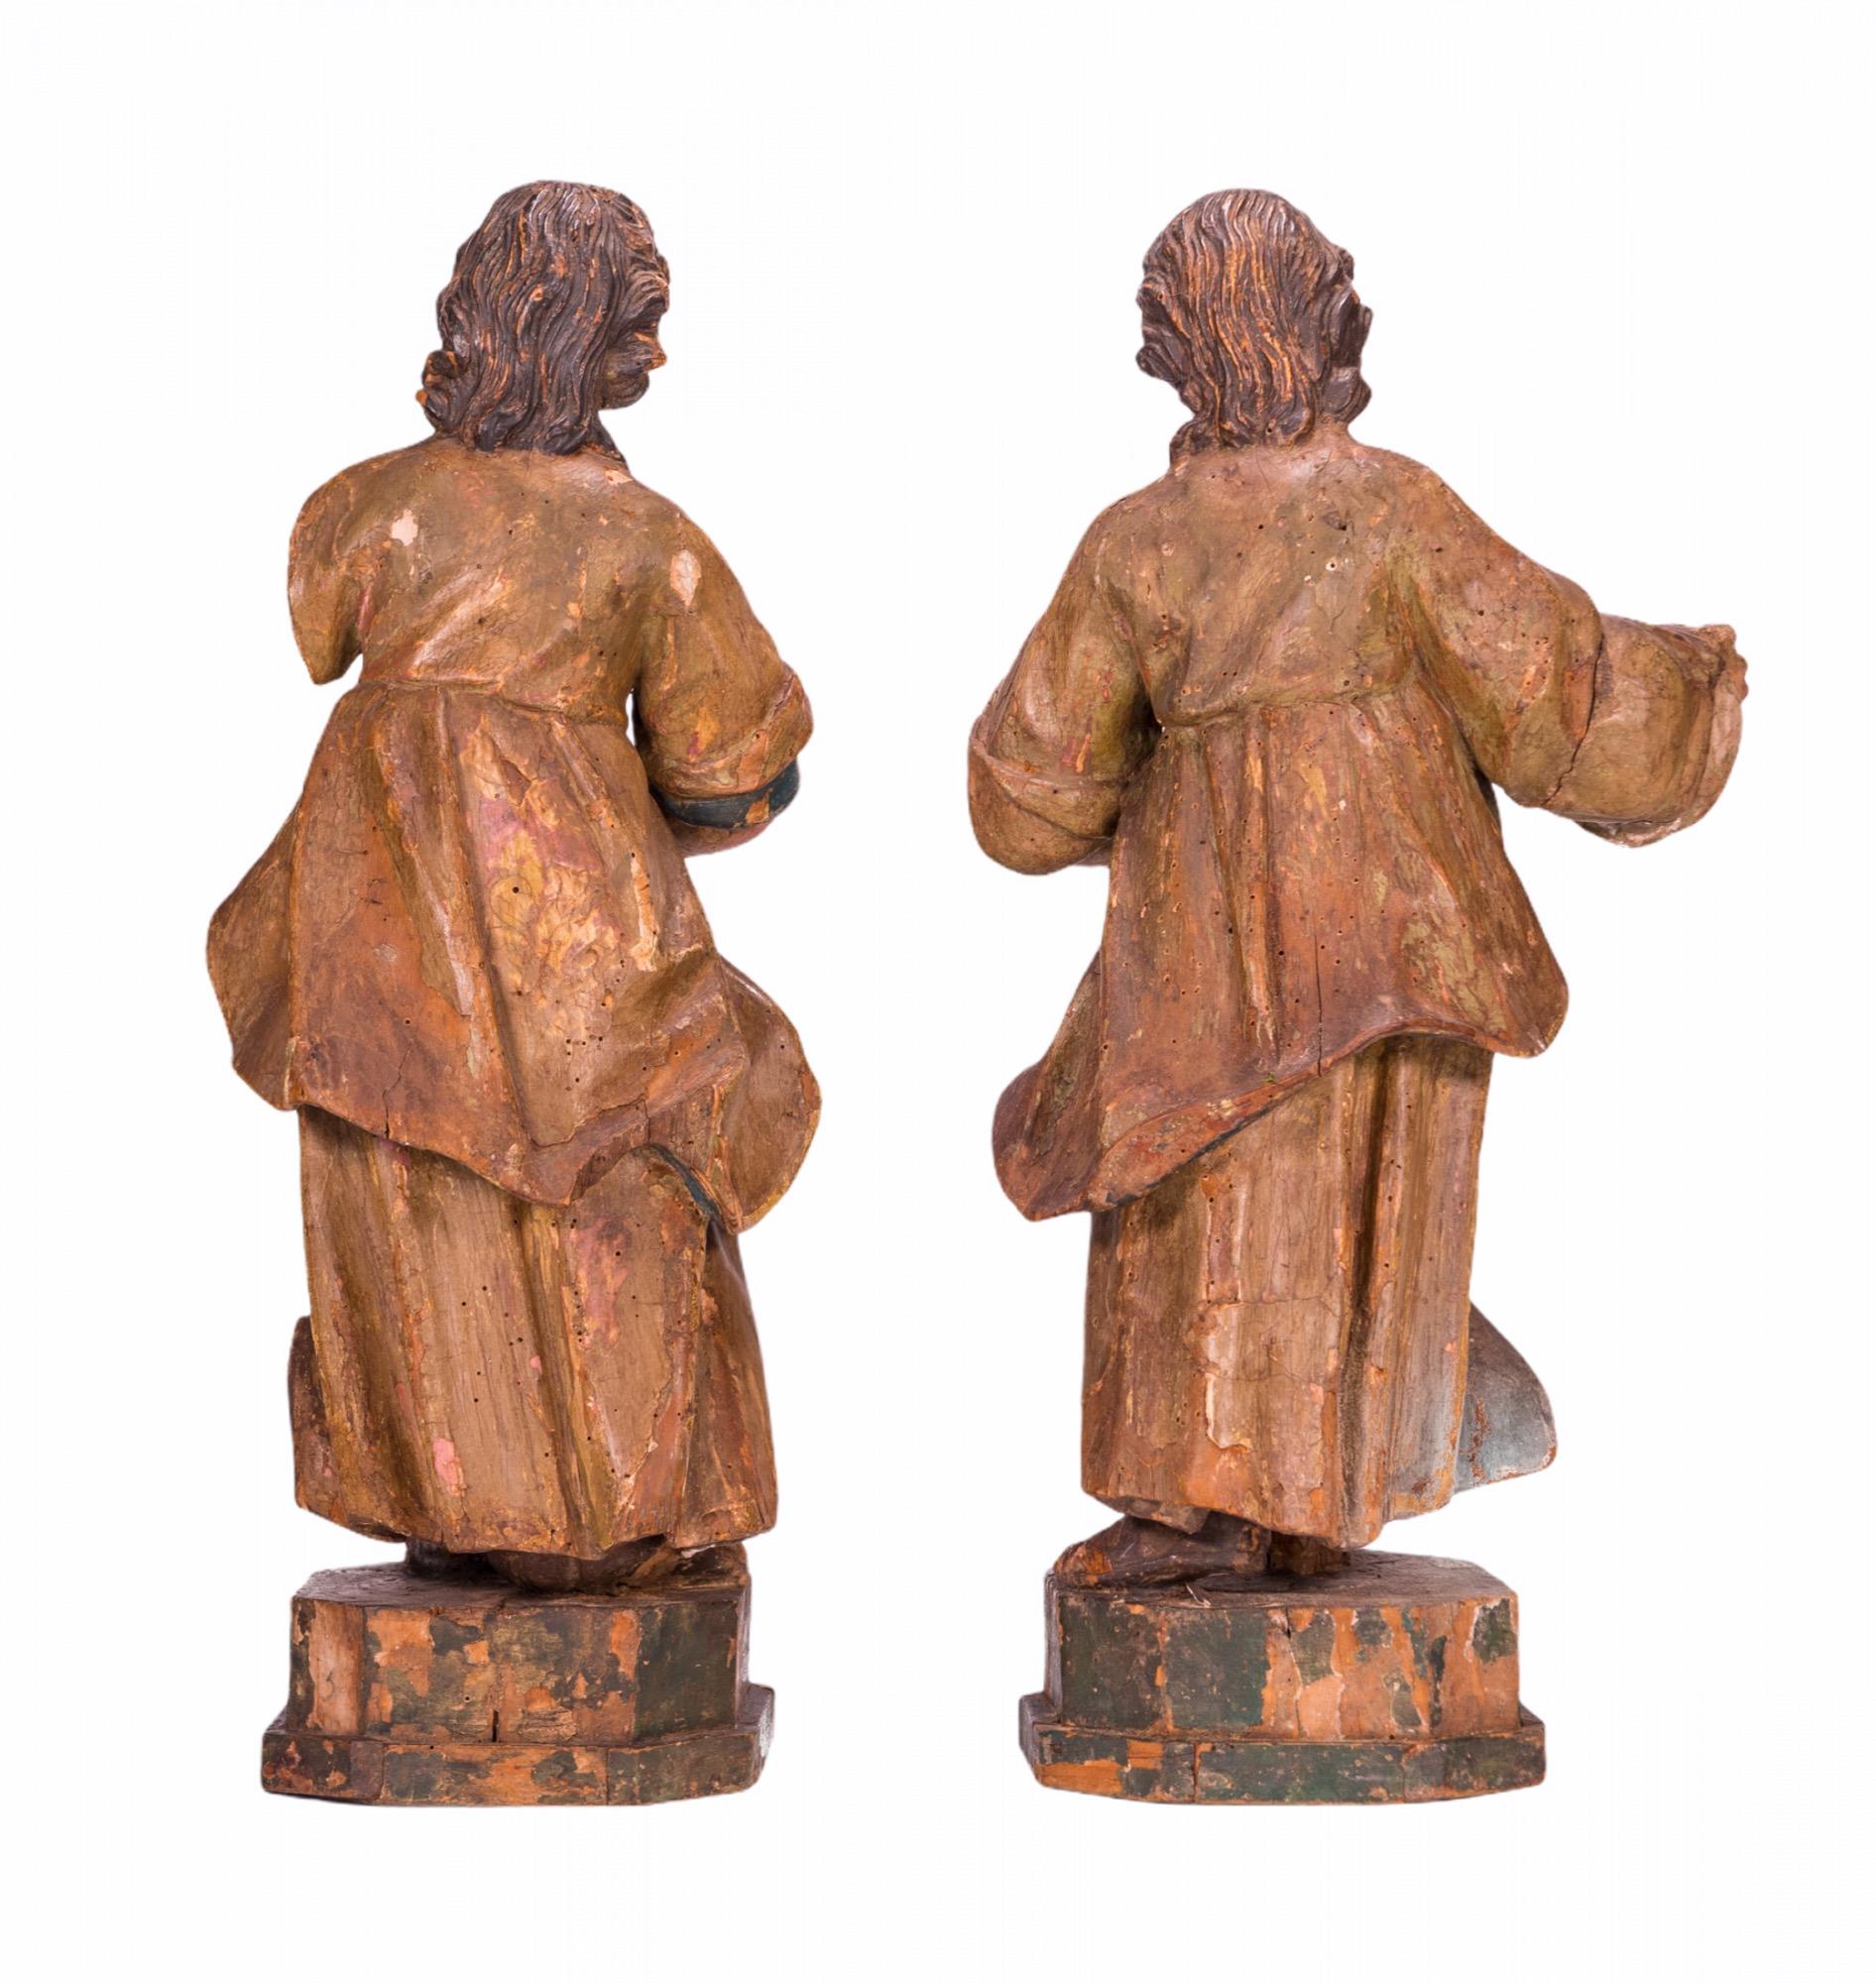 Renaissance Angelic Carved Wood Sculptures, 16th Century